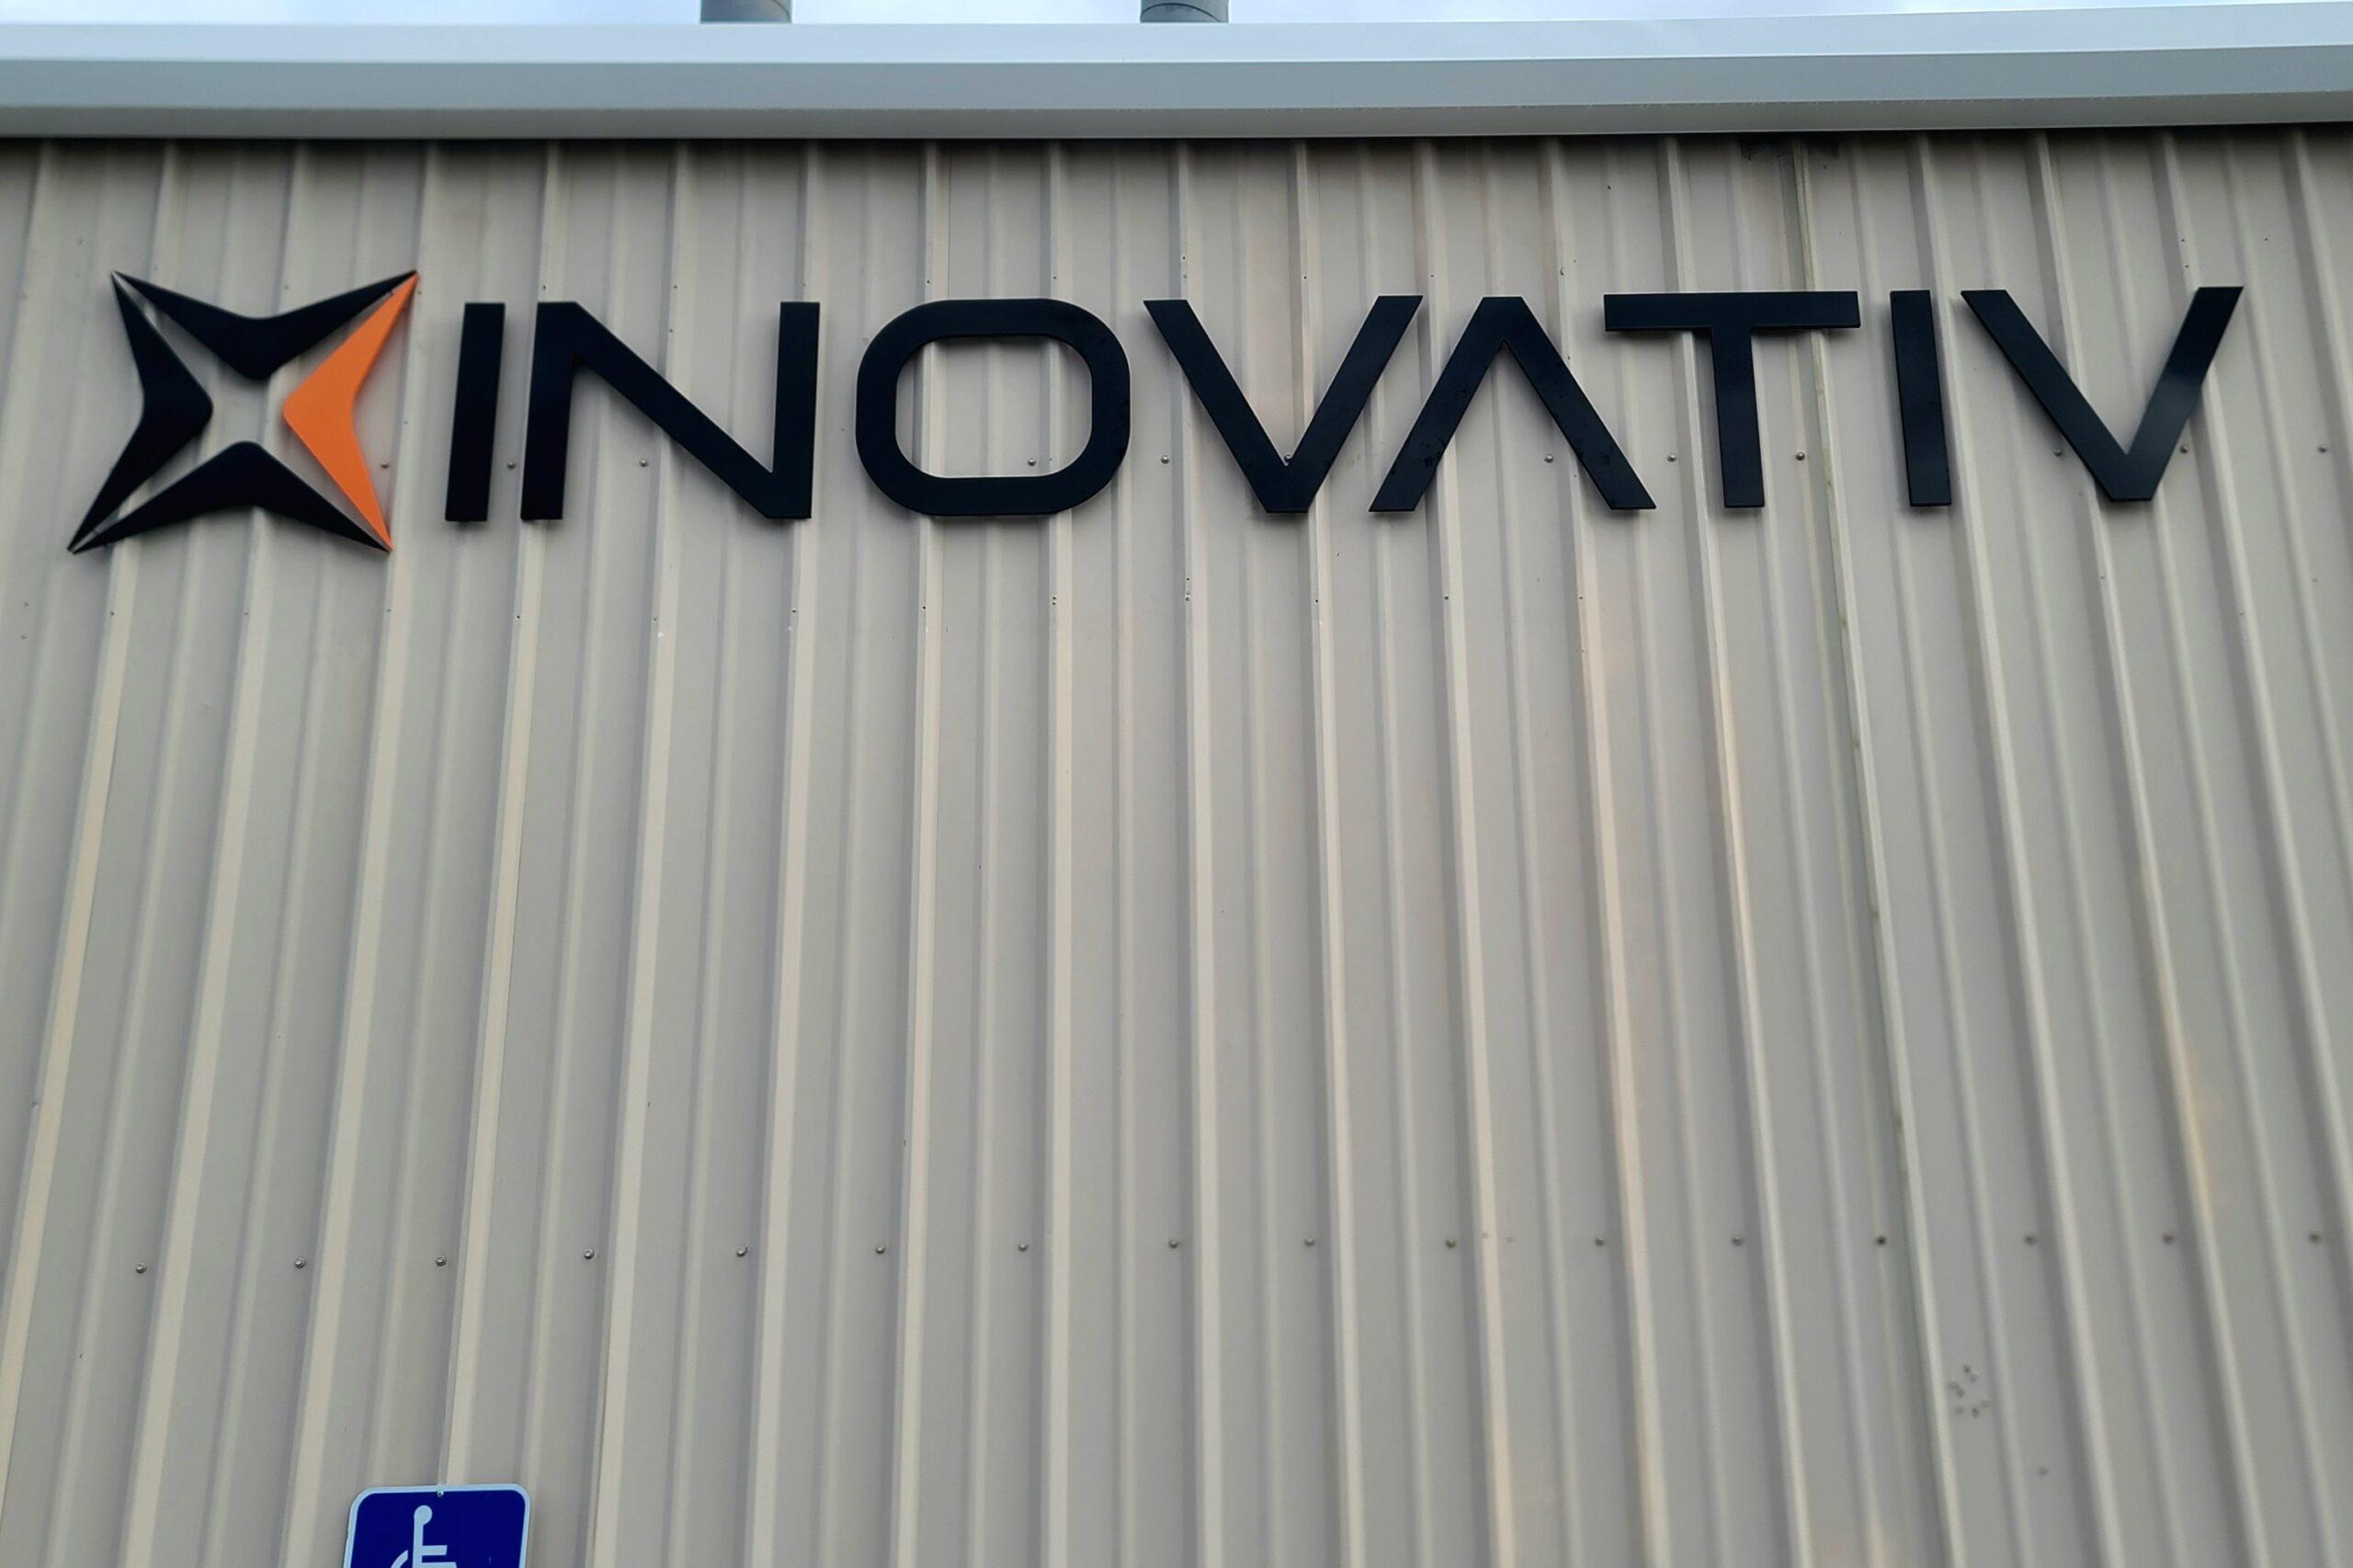 You are currently viewing Inovativ’s Exterior Wall Sign in Azusa